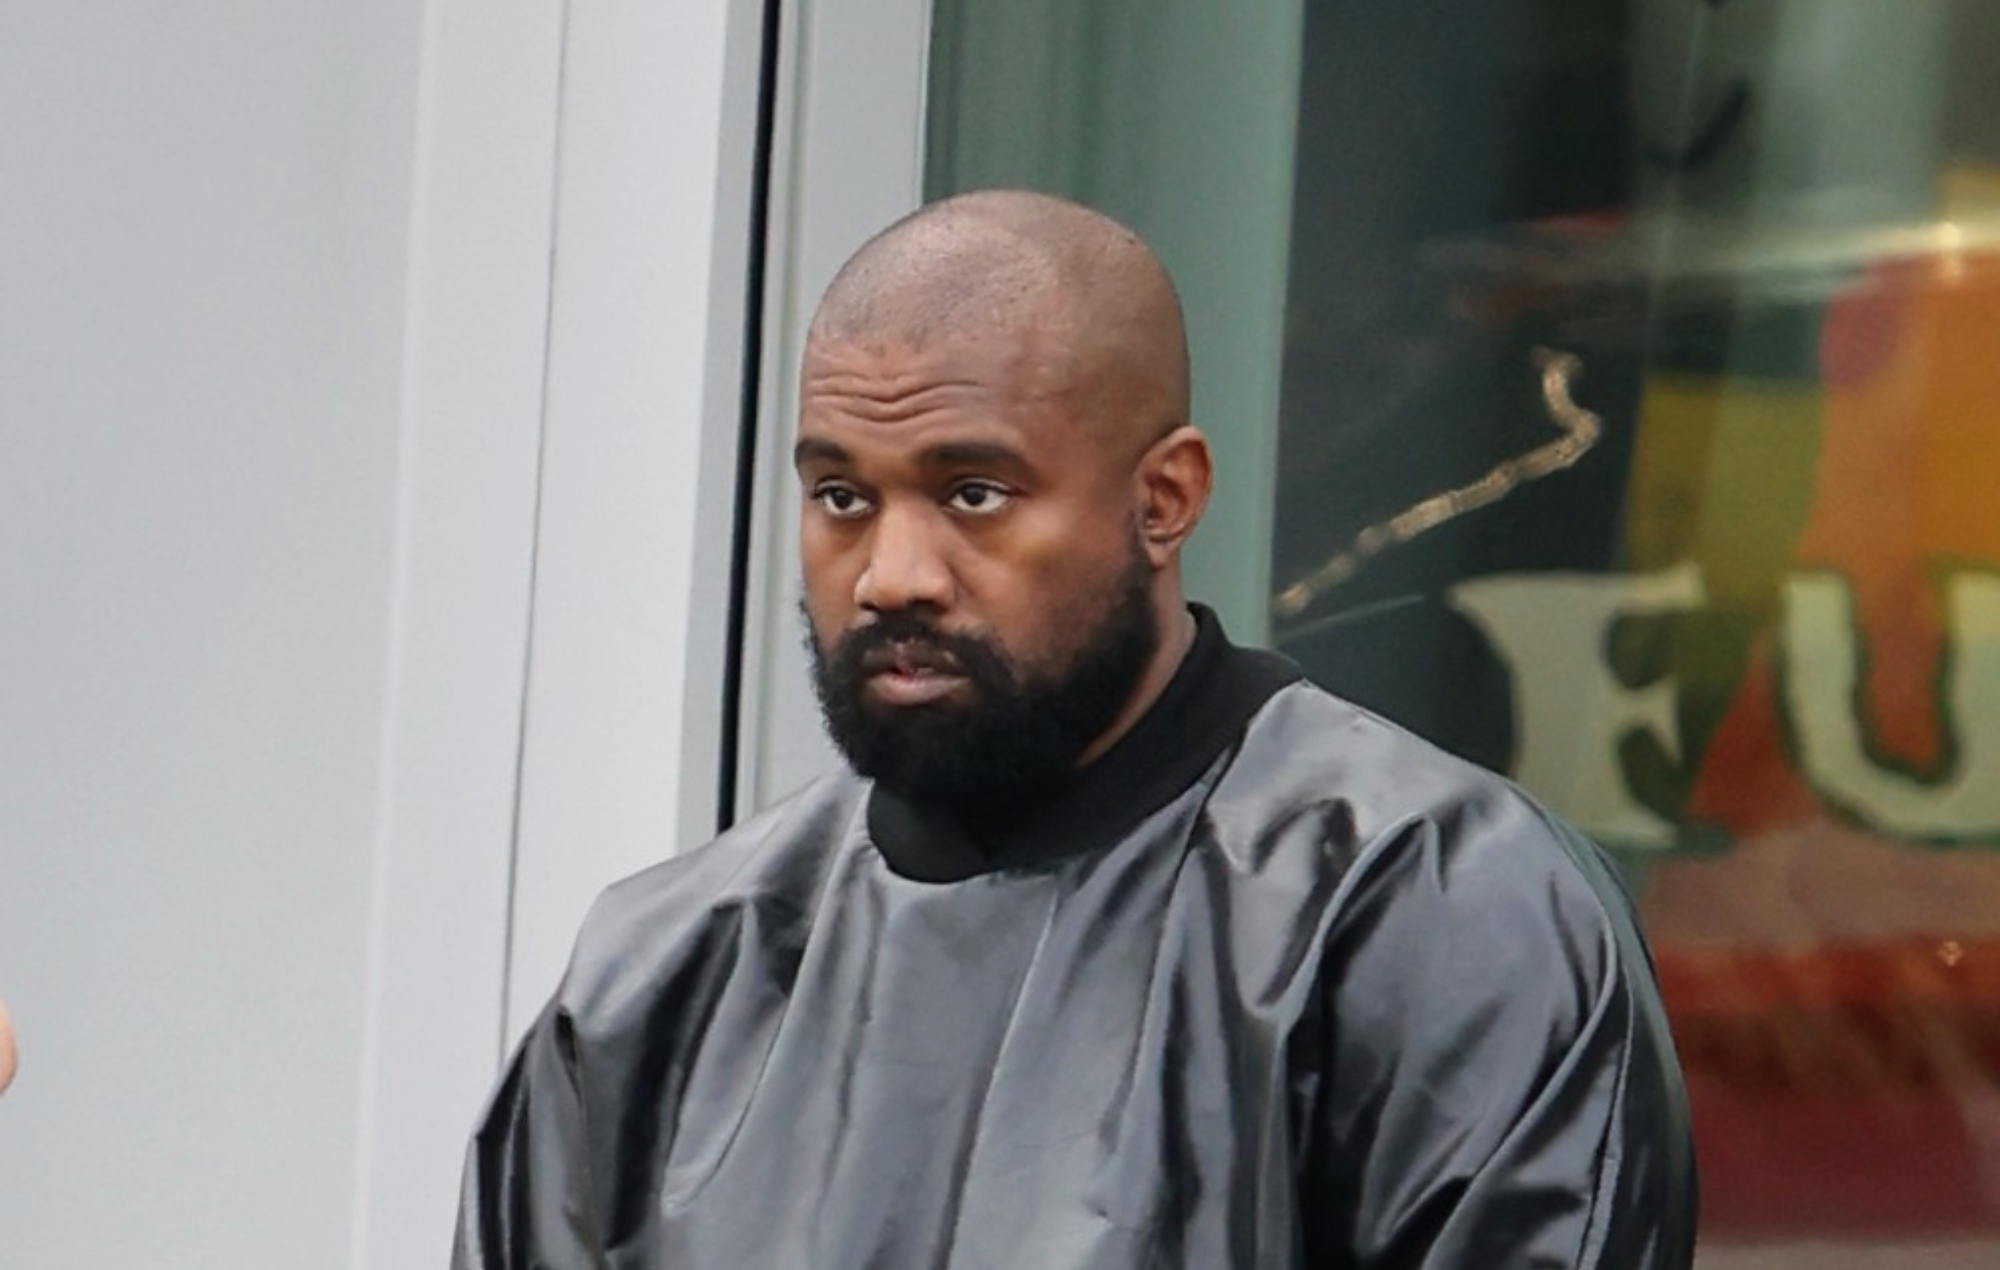 Kanye West allegedly drew a swastika in an early Adidas meeting